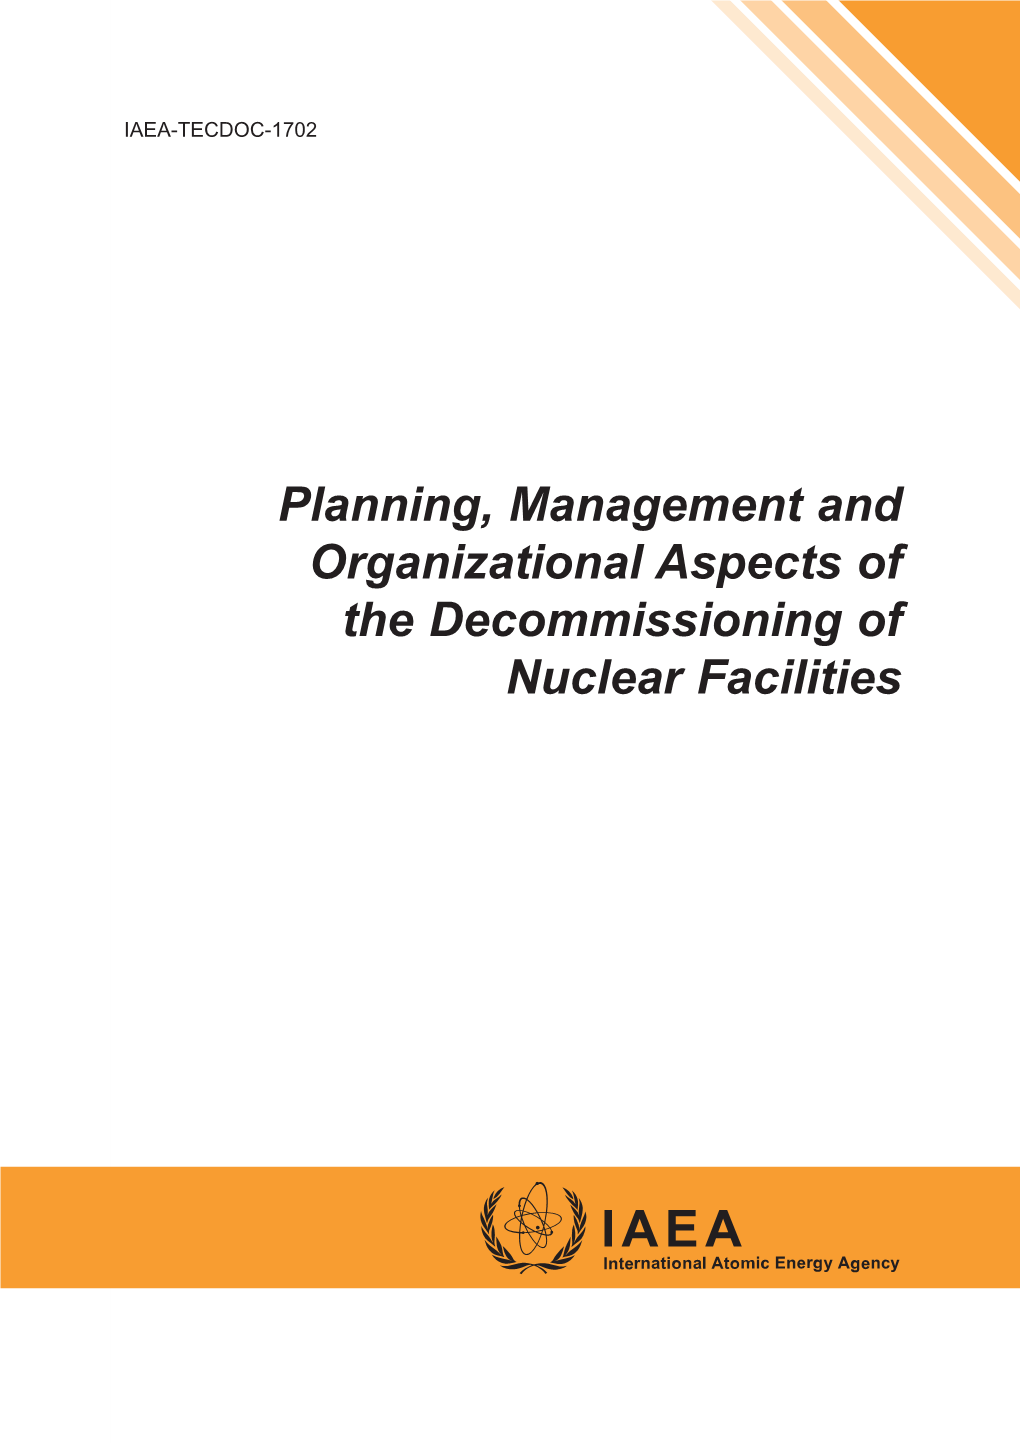 Planning, Management and Organizational Aspects of The